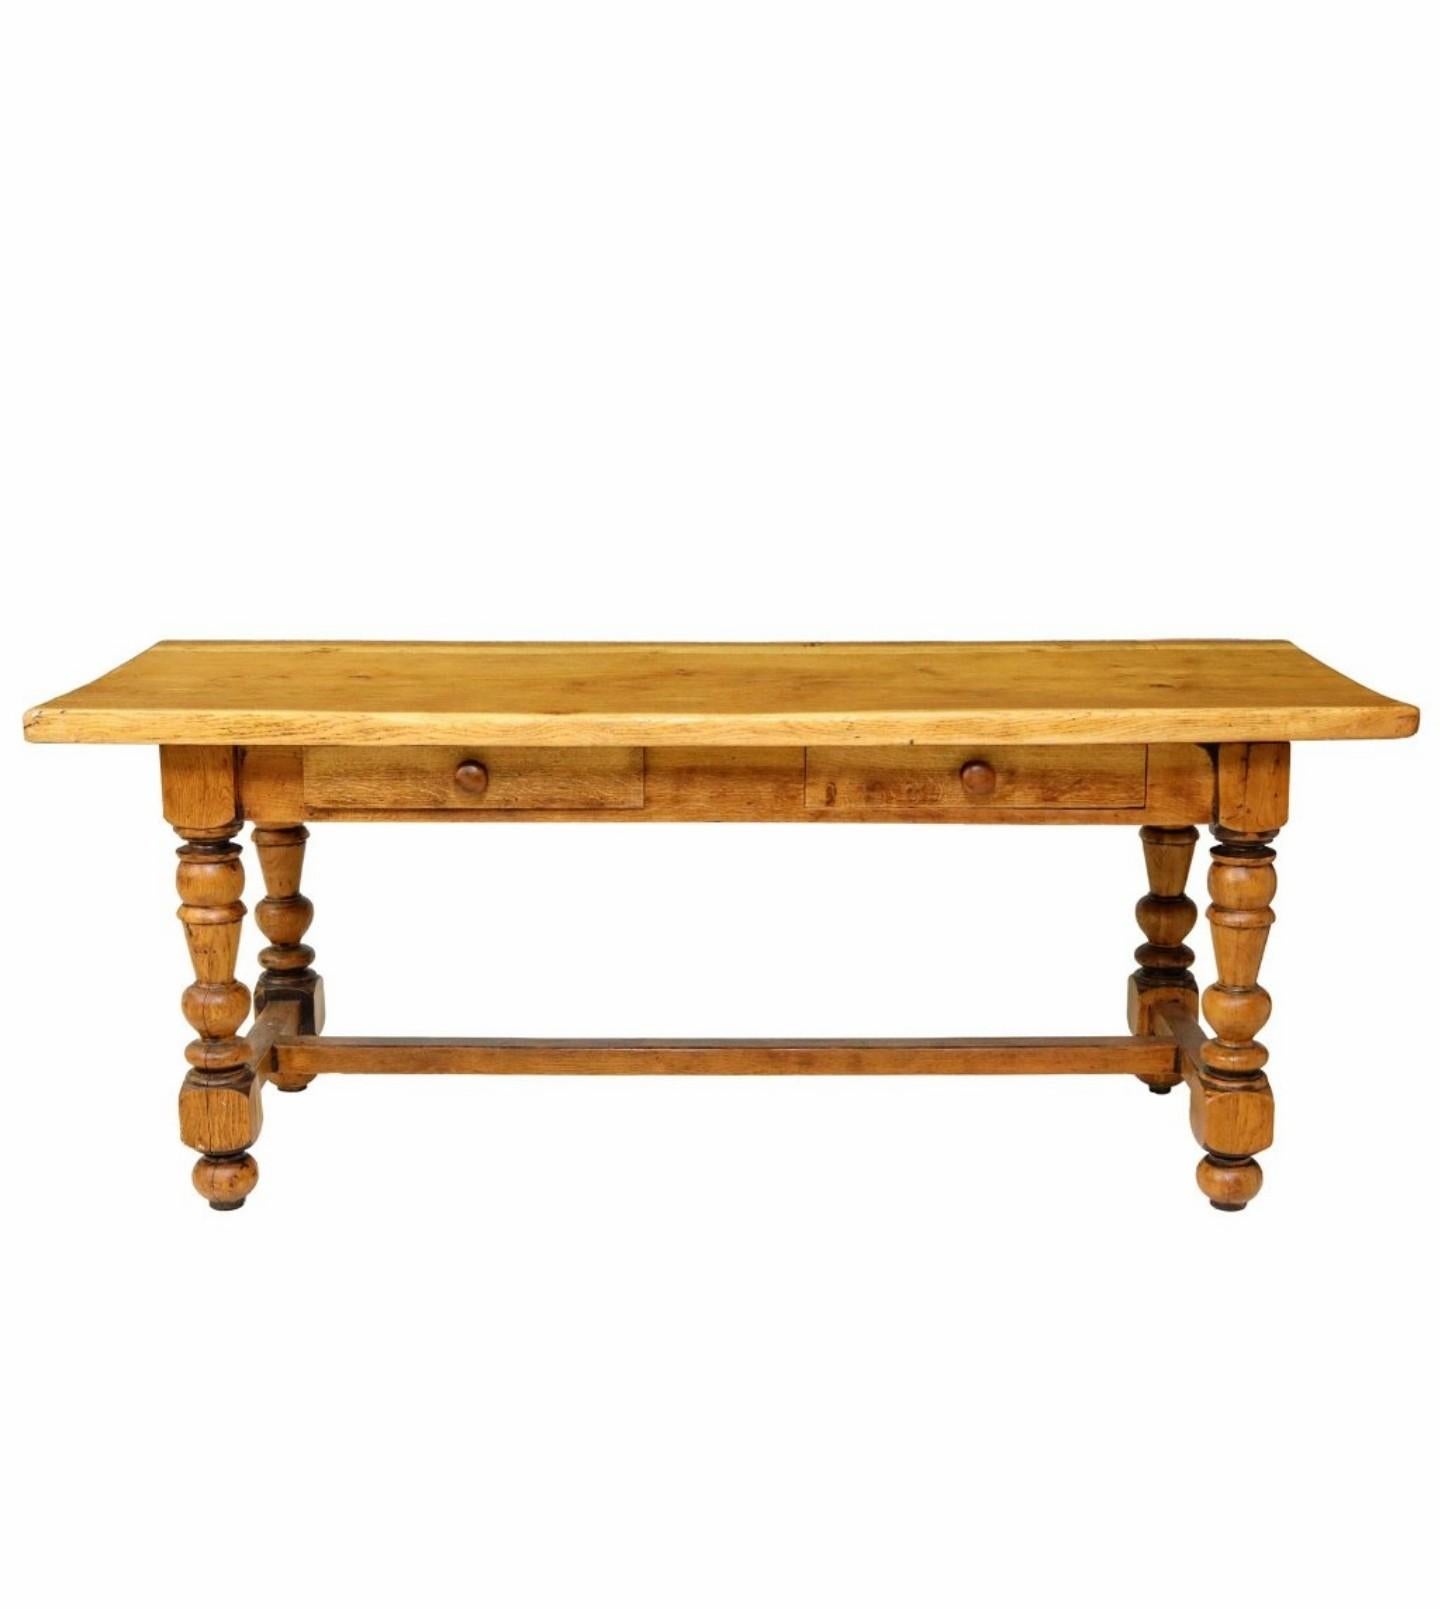 A rustic antique, circa 1880, French or Italian Provincial oak country farm house harvest work table (today it would make for a wonderful dining table, library table, or workbench)

Born in Provincial France or Italy in the 19th century,